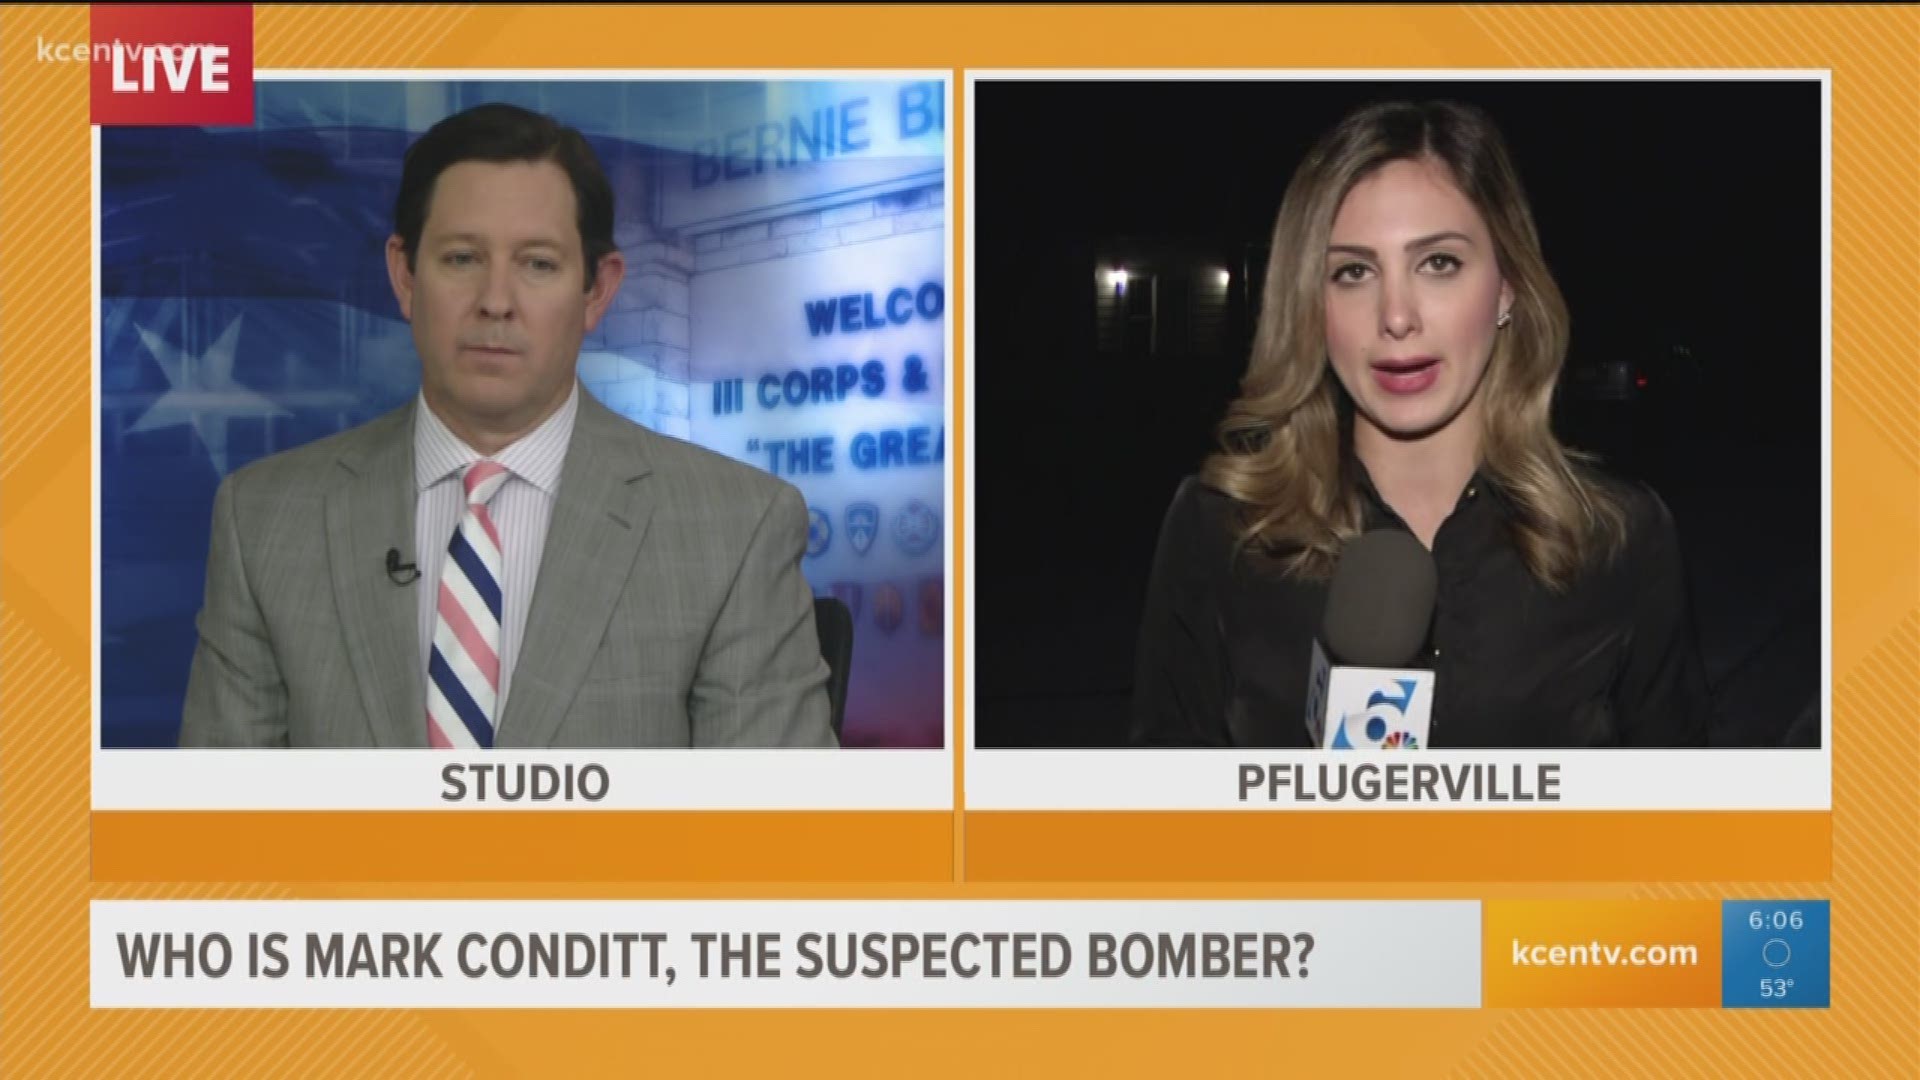 Heidi Alagha gives details on the Austin suspect bomber